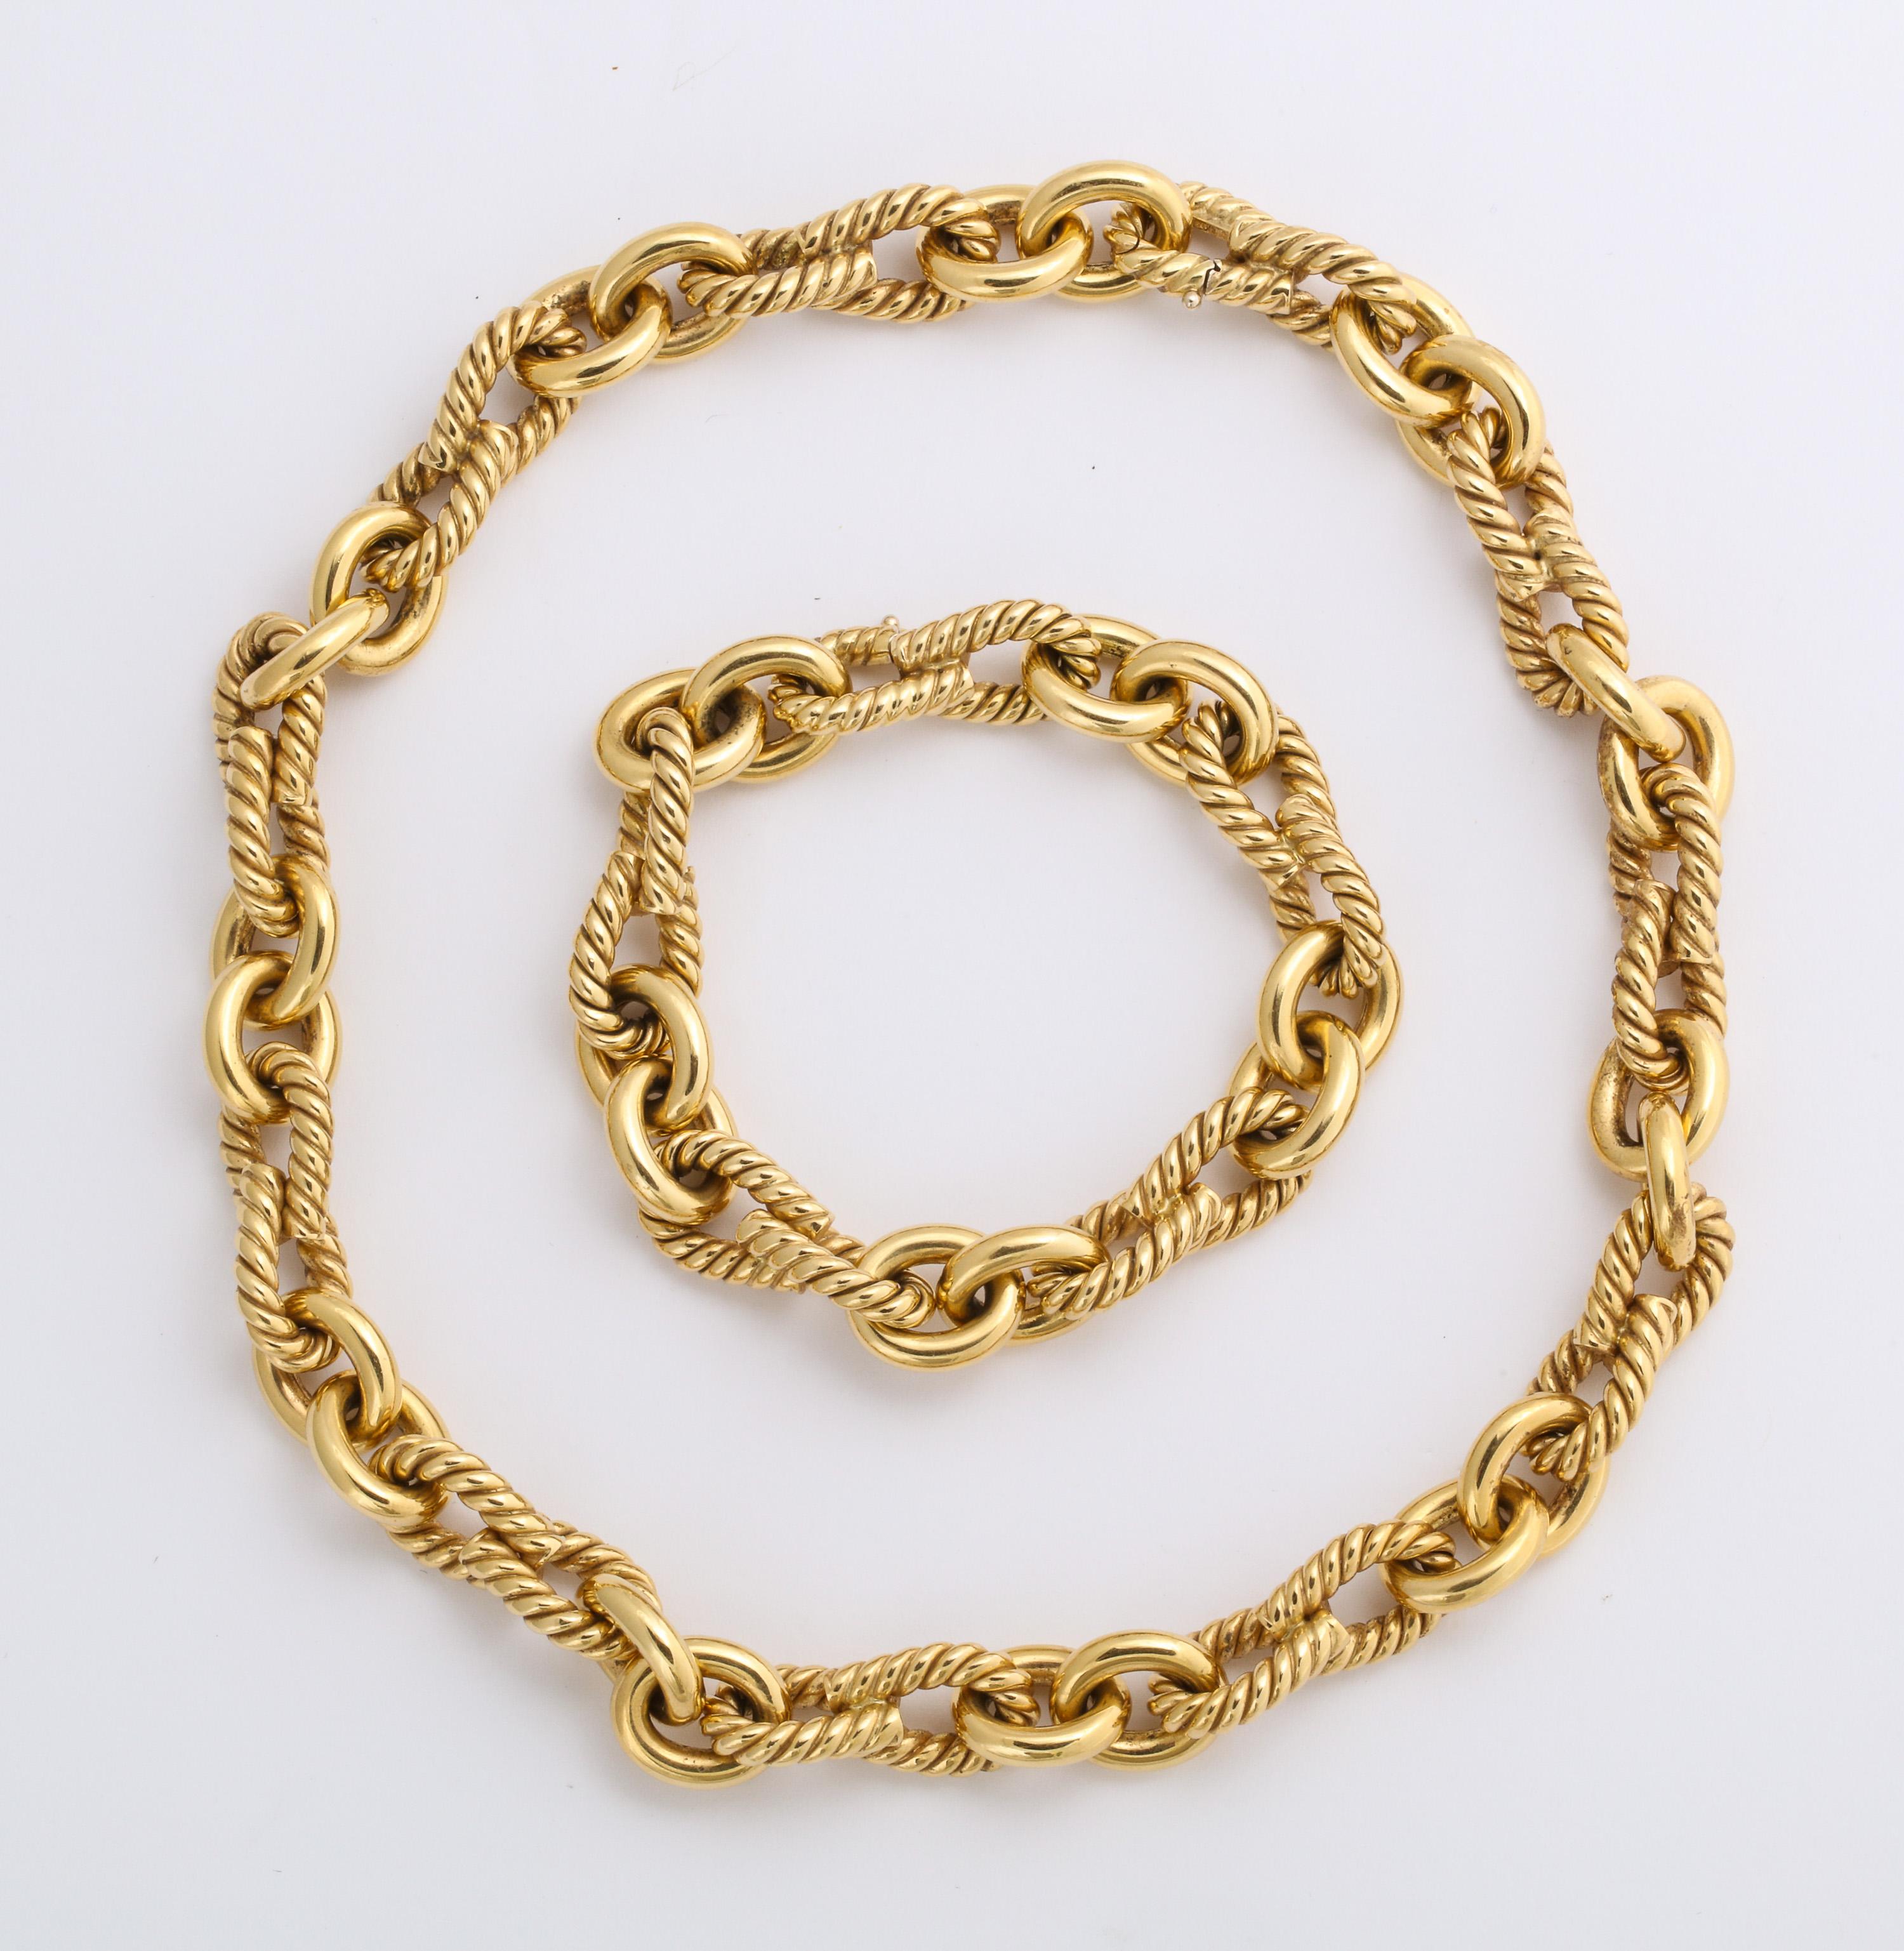 18Kt Yellow Gold Neckace .\&Bracelet Set.  Signed Nicolis Cola & bears double makers mark.  Can be worn separately or together to make one longer piece.
Very Italian & very high style.  Sophistication at its best.  Both sexy & ladylike.  Ca 1980